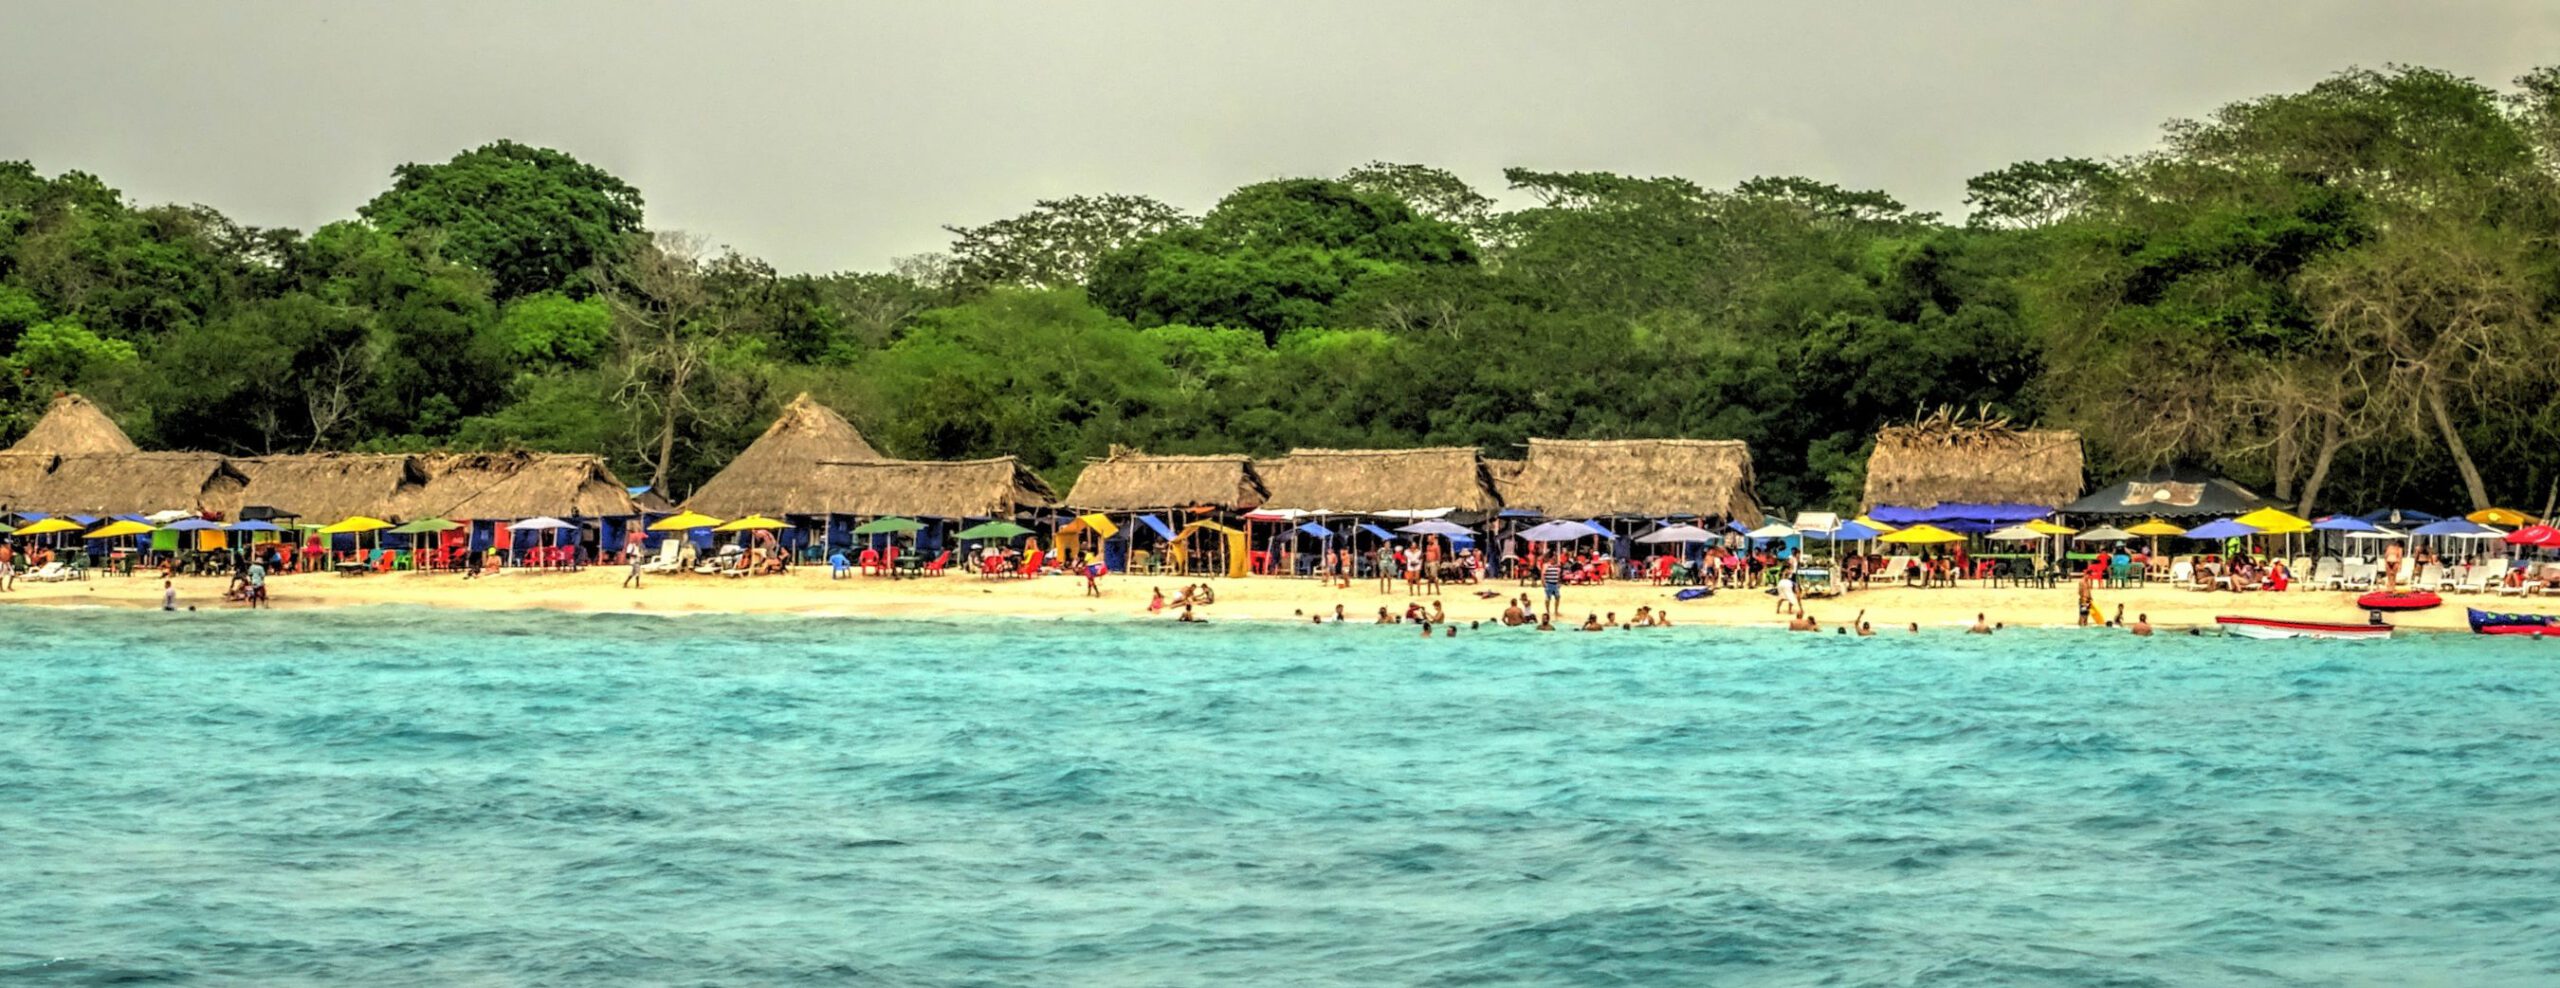 a group of people on a beach with umbrellas.